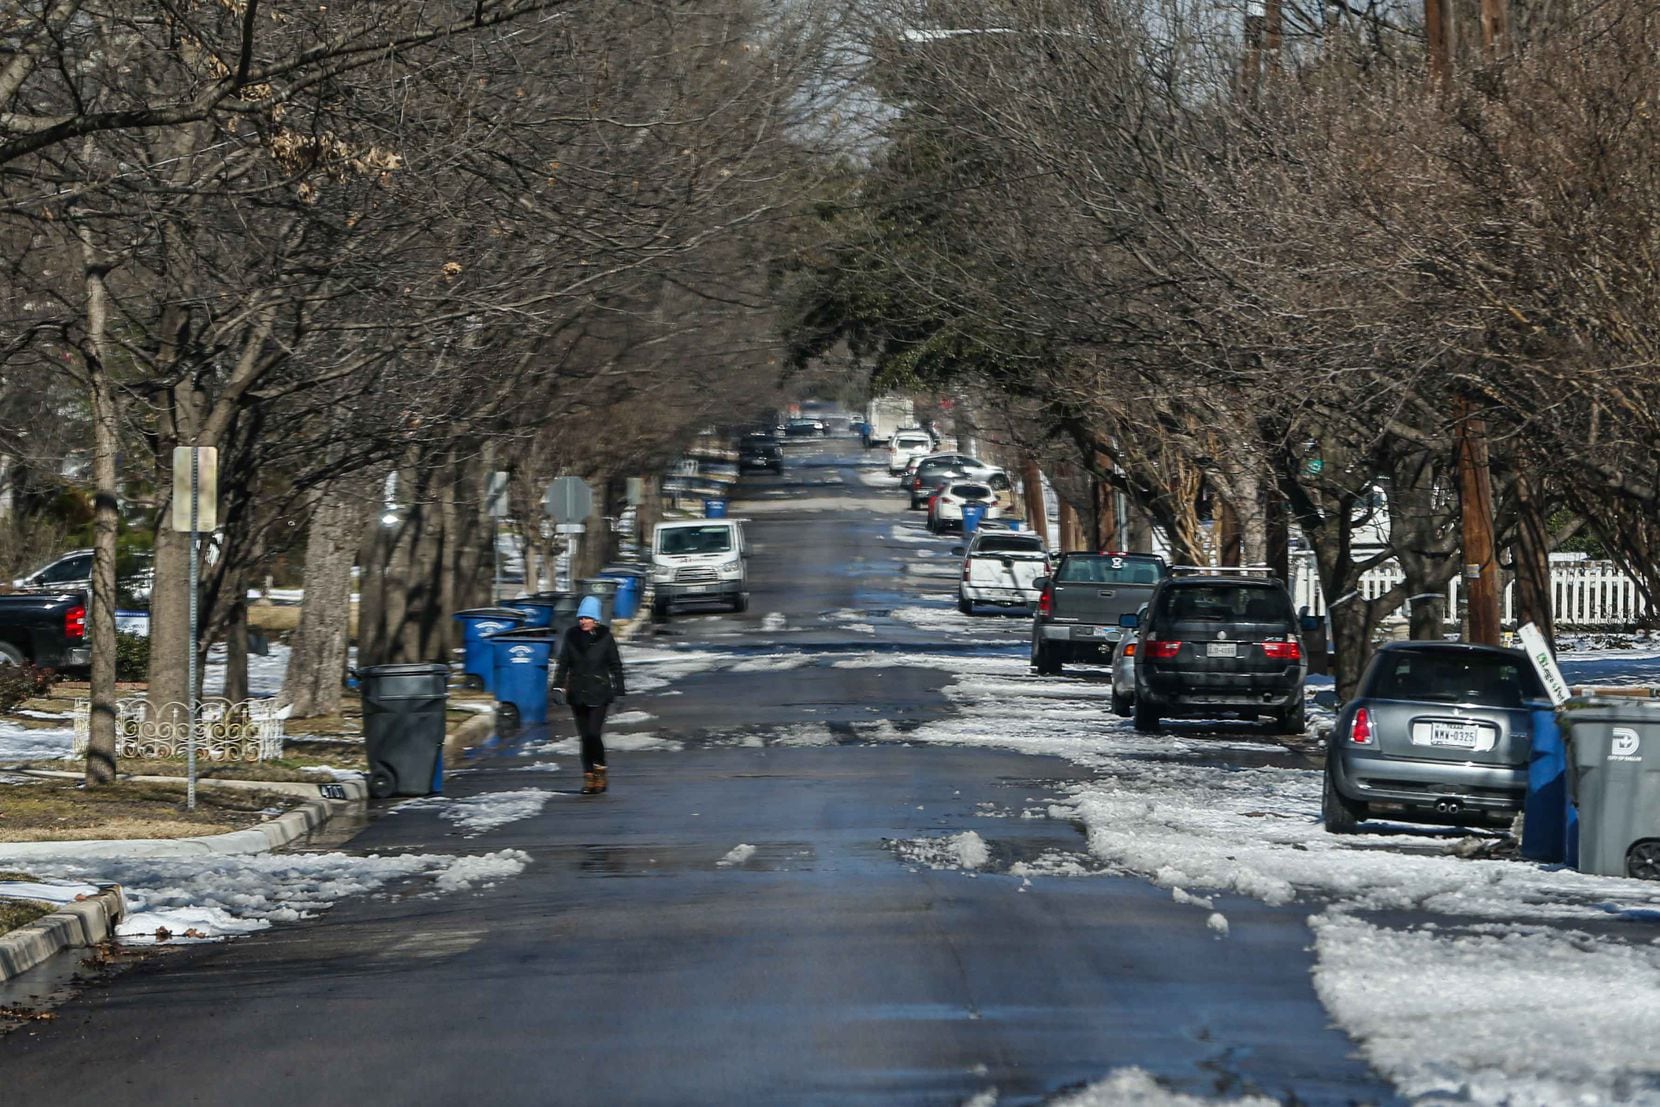 North Texas has begun to thaw out from the week's freezing weather, but trouble such as lingering power outages and boil-water notices remain. Above is a scene from Dallas' Swiss Avenue on Friday, Feb. 19, 2021.